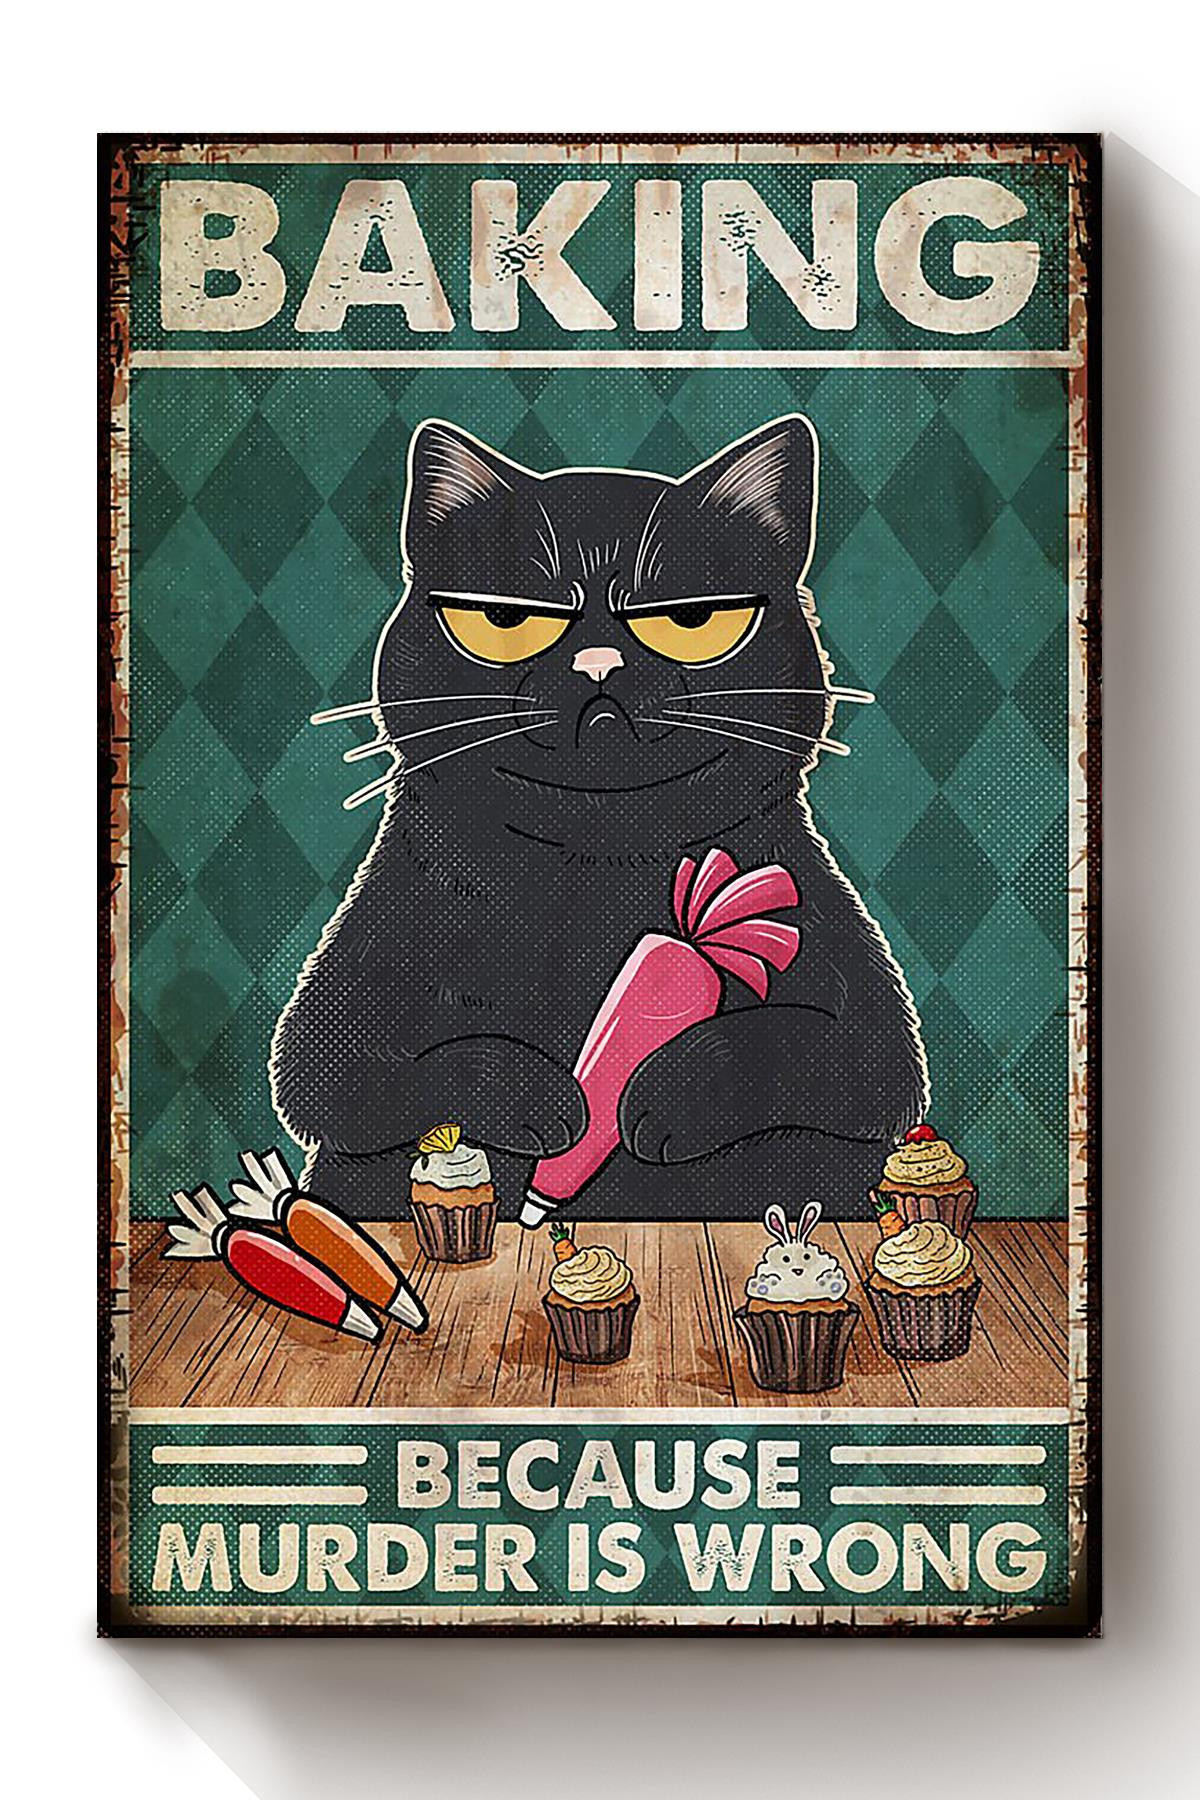 Black Cat Baking Because Murder Is Wrong Vintage For Bakery Shop Cat Lover Canvas Framed Prints, Canvas Paintings Wrapped Canvas 8x10